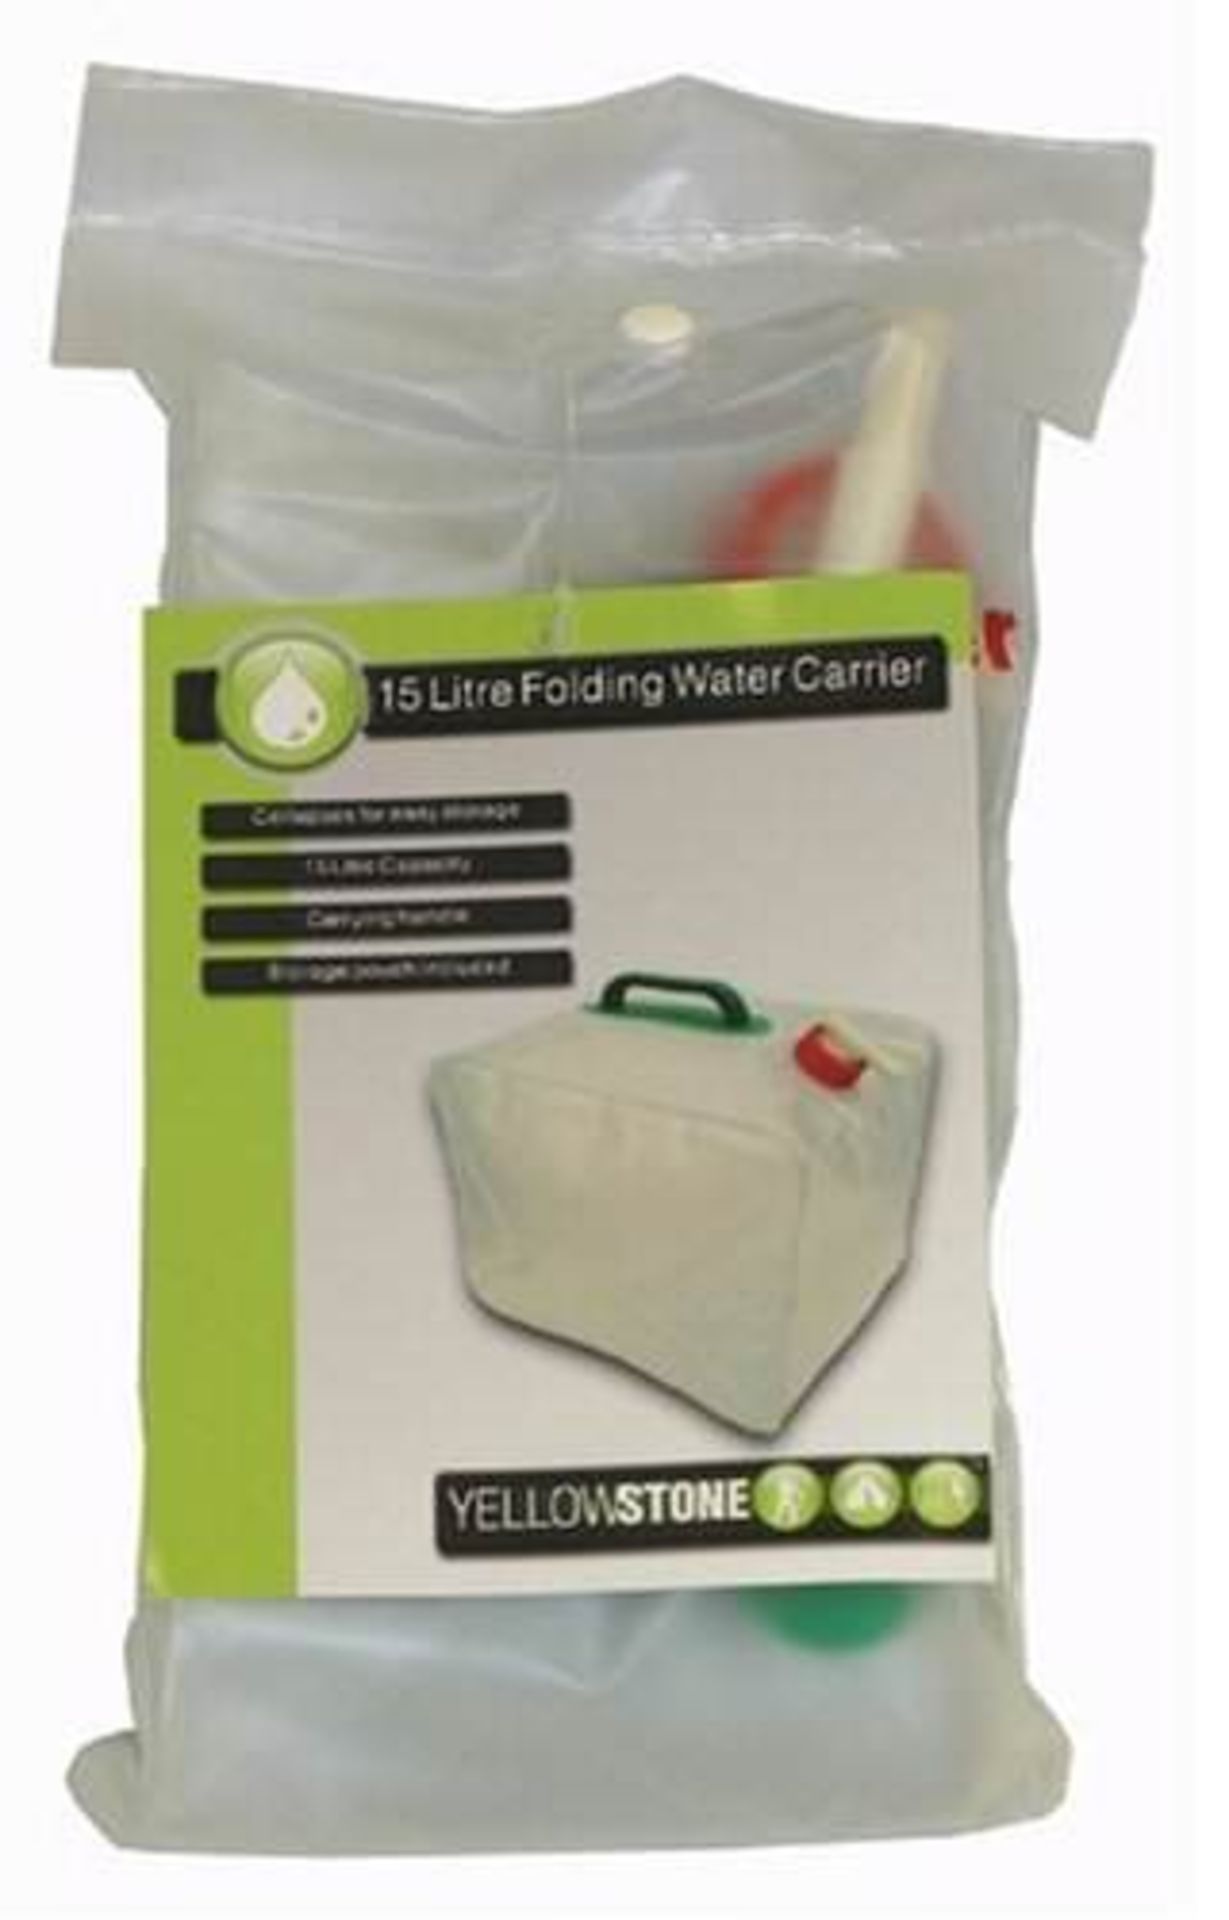 V Grade A 15 Litre Folding Water Carrier With Carry Handle - Image 2 of 2